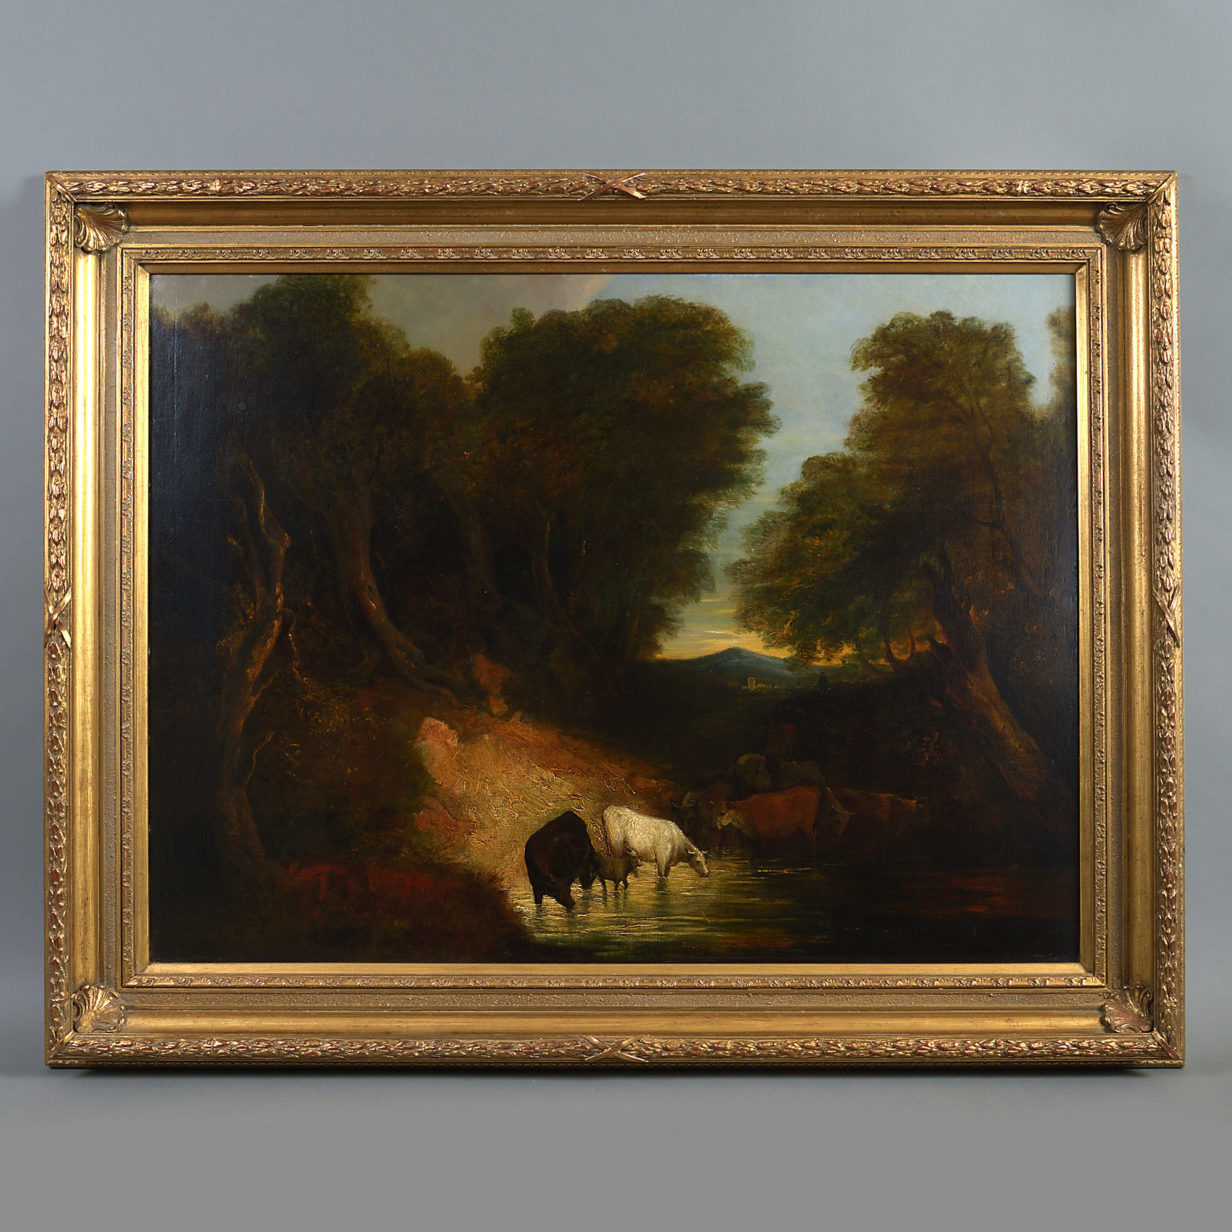 A late 18th century landscape after thomas gainsborough